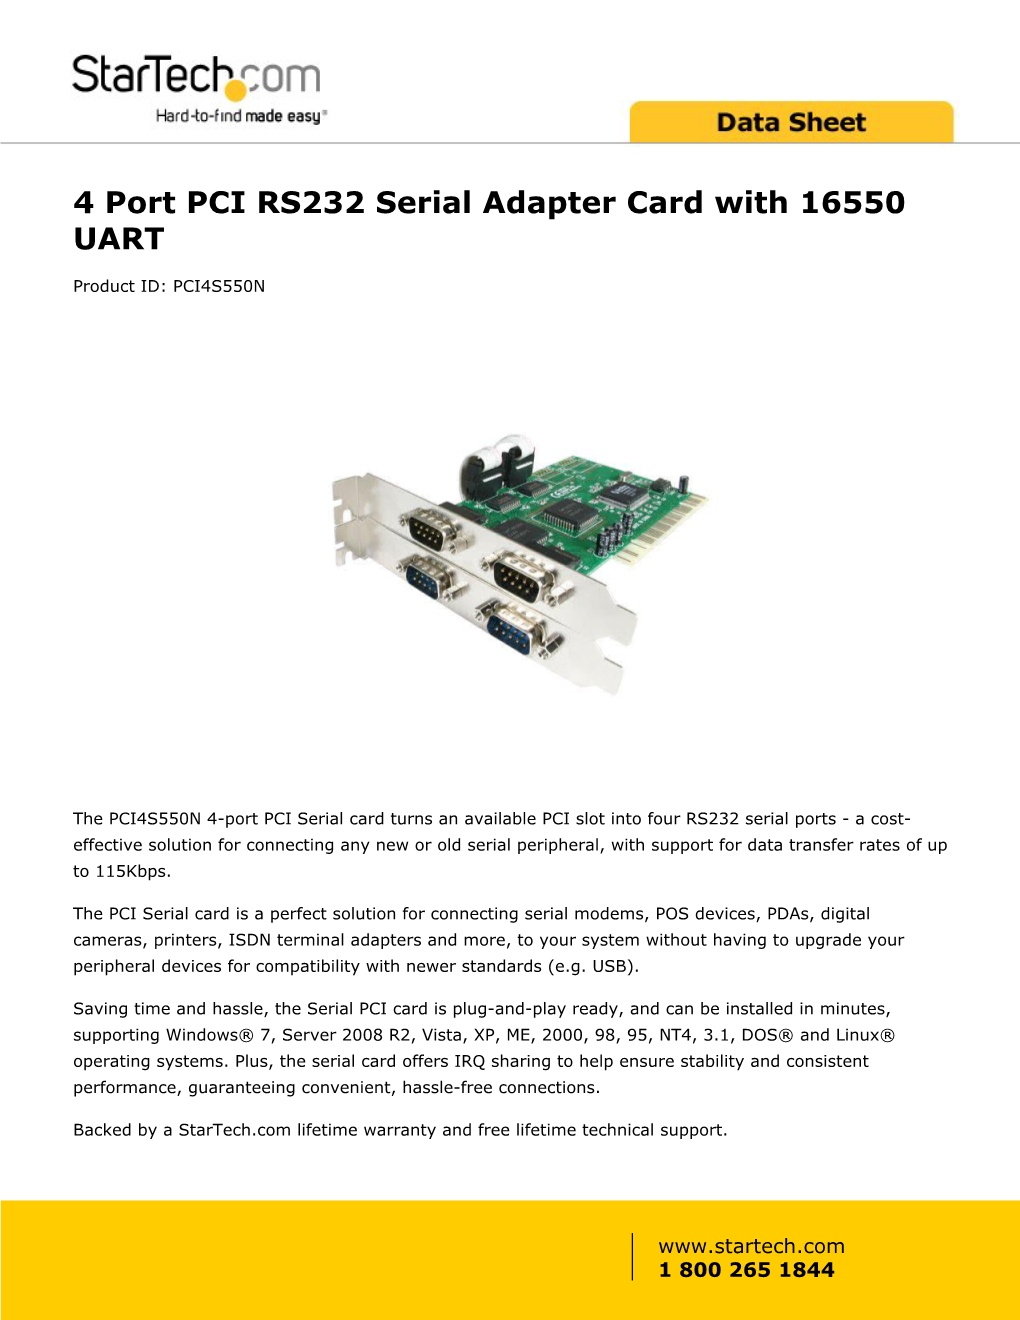 4 Port PCI RS232 Serial Adapter Card with 16550 UART